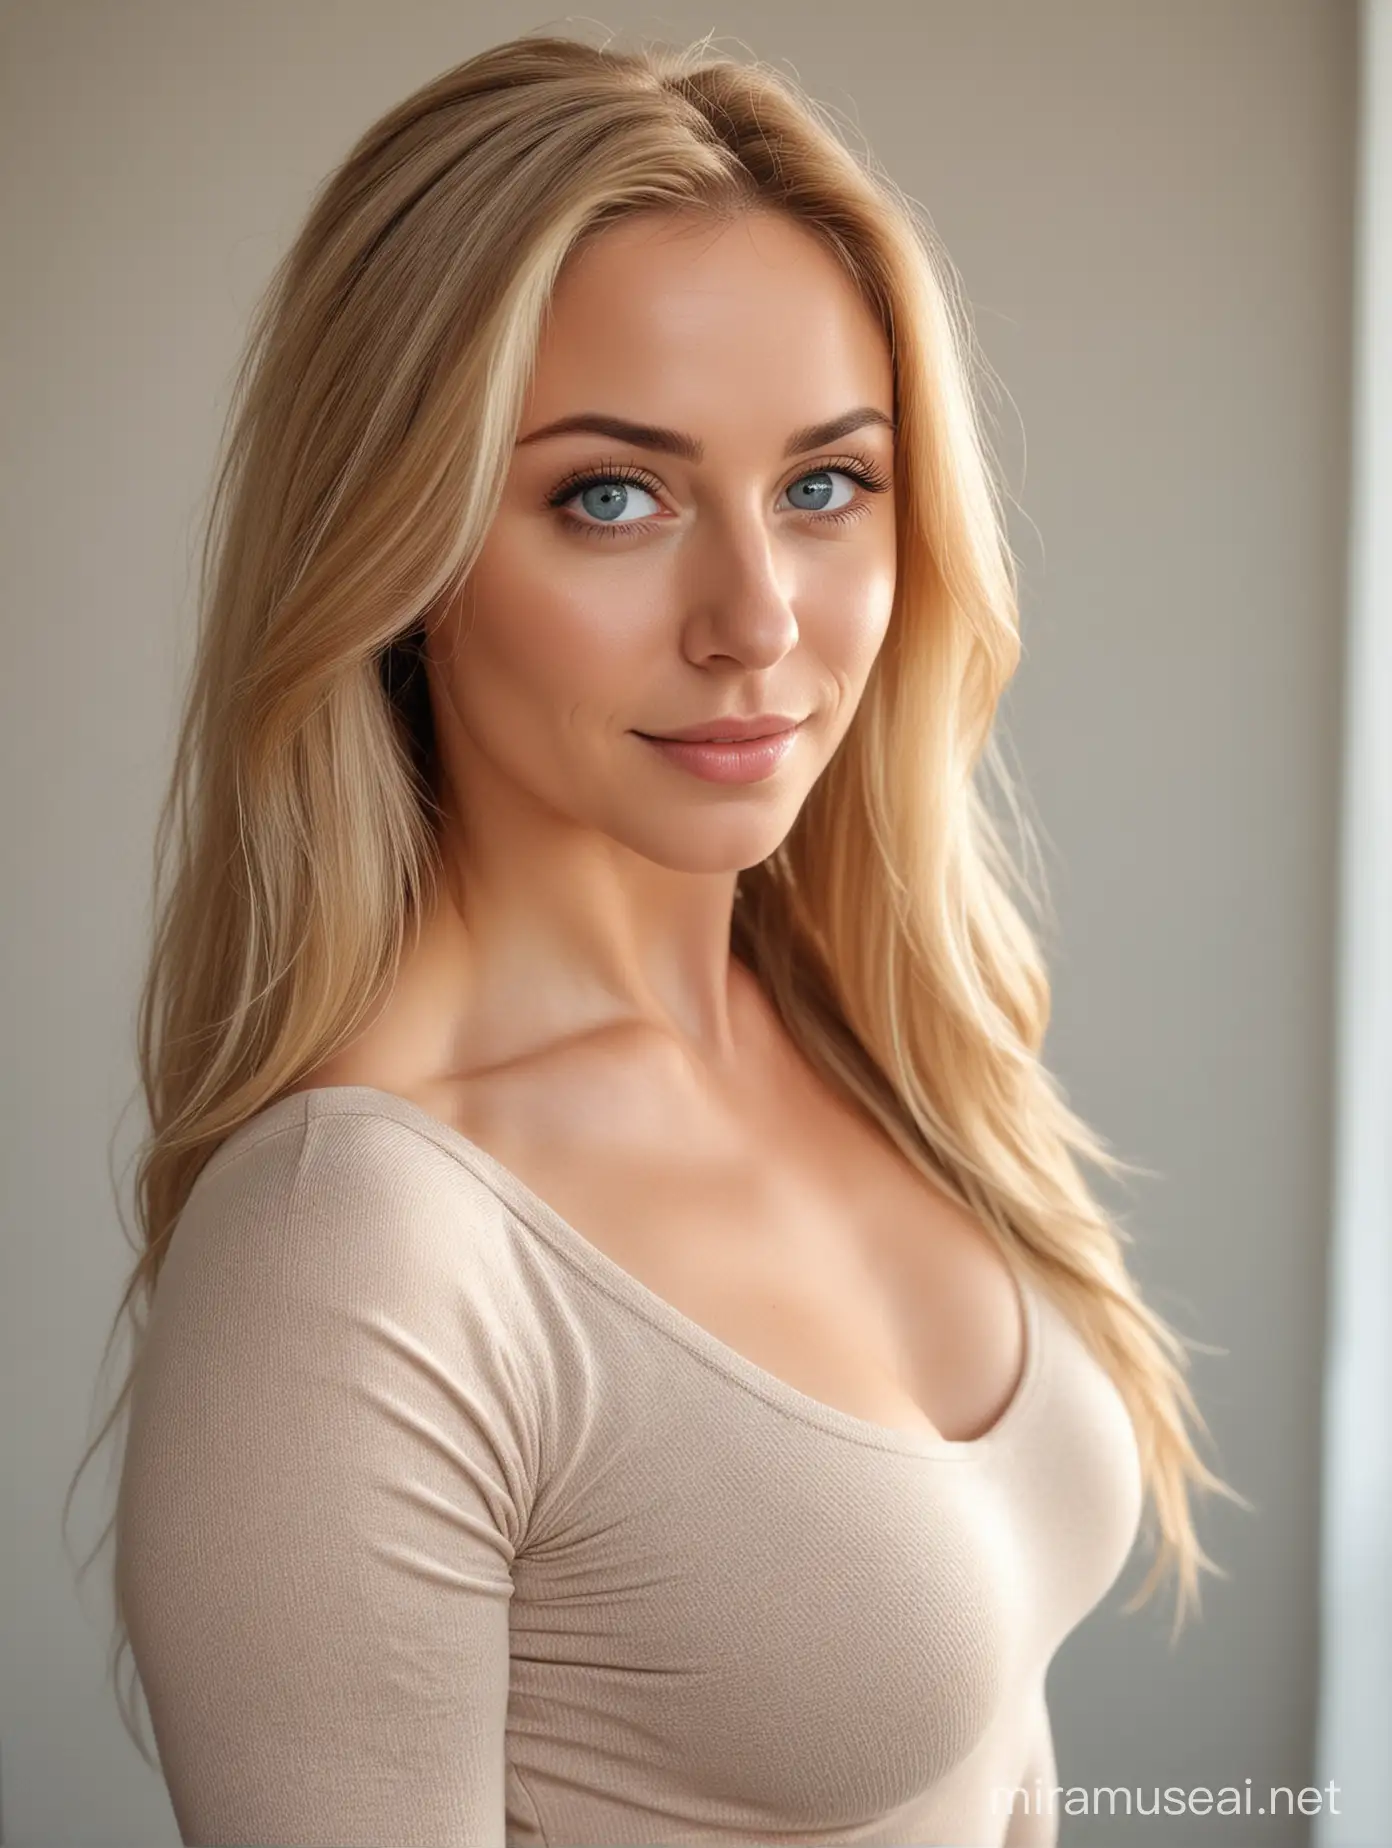 beautiful graceful pretty cute 35 years old women, golden hair, blue eyes, porcelain skin, natural beauty, natural makeup, muscle amazing body and figure, spandex outfit, gym lockerrom